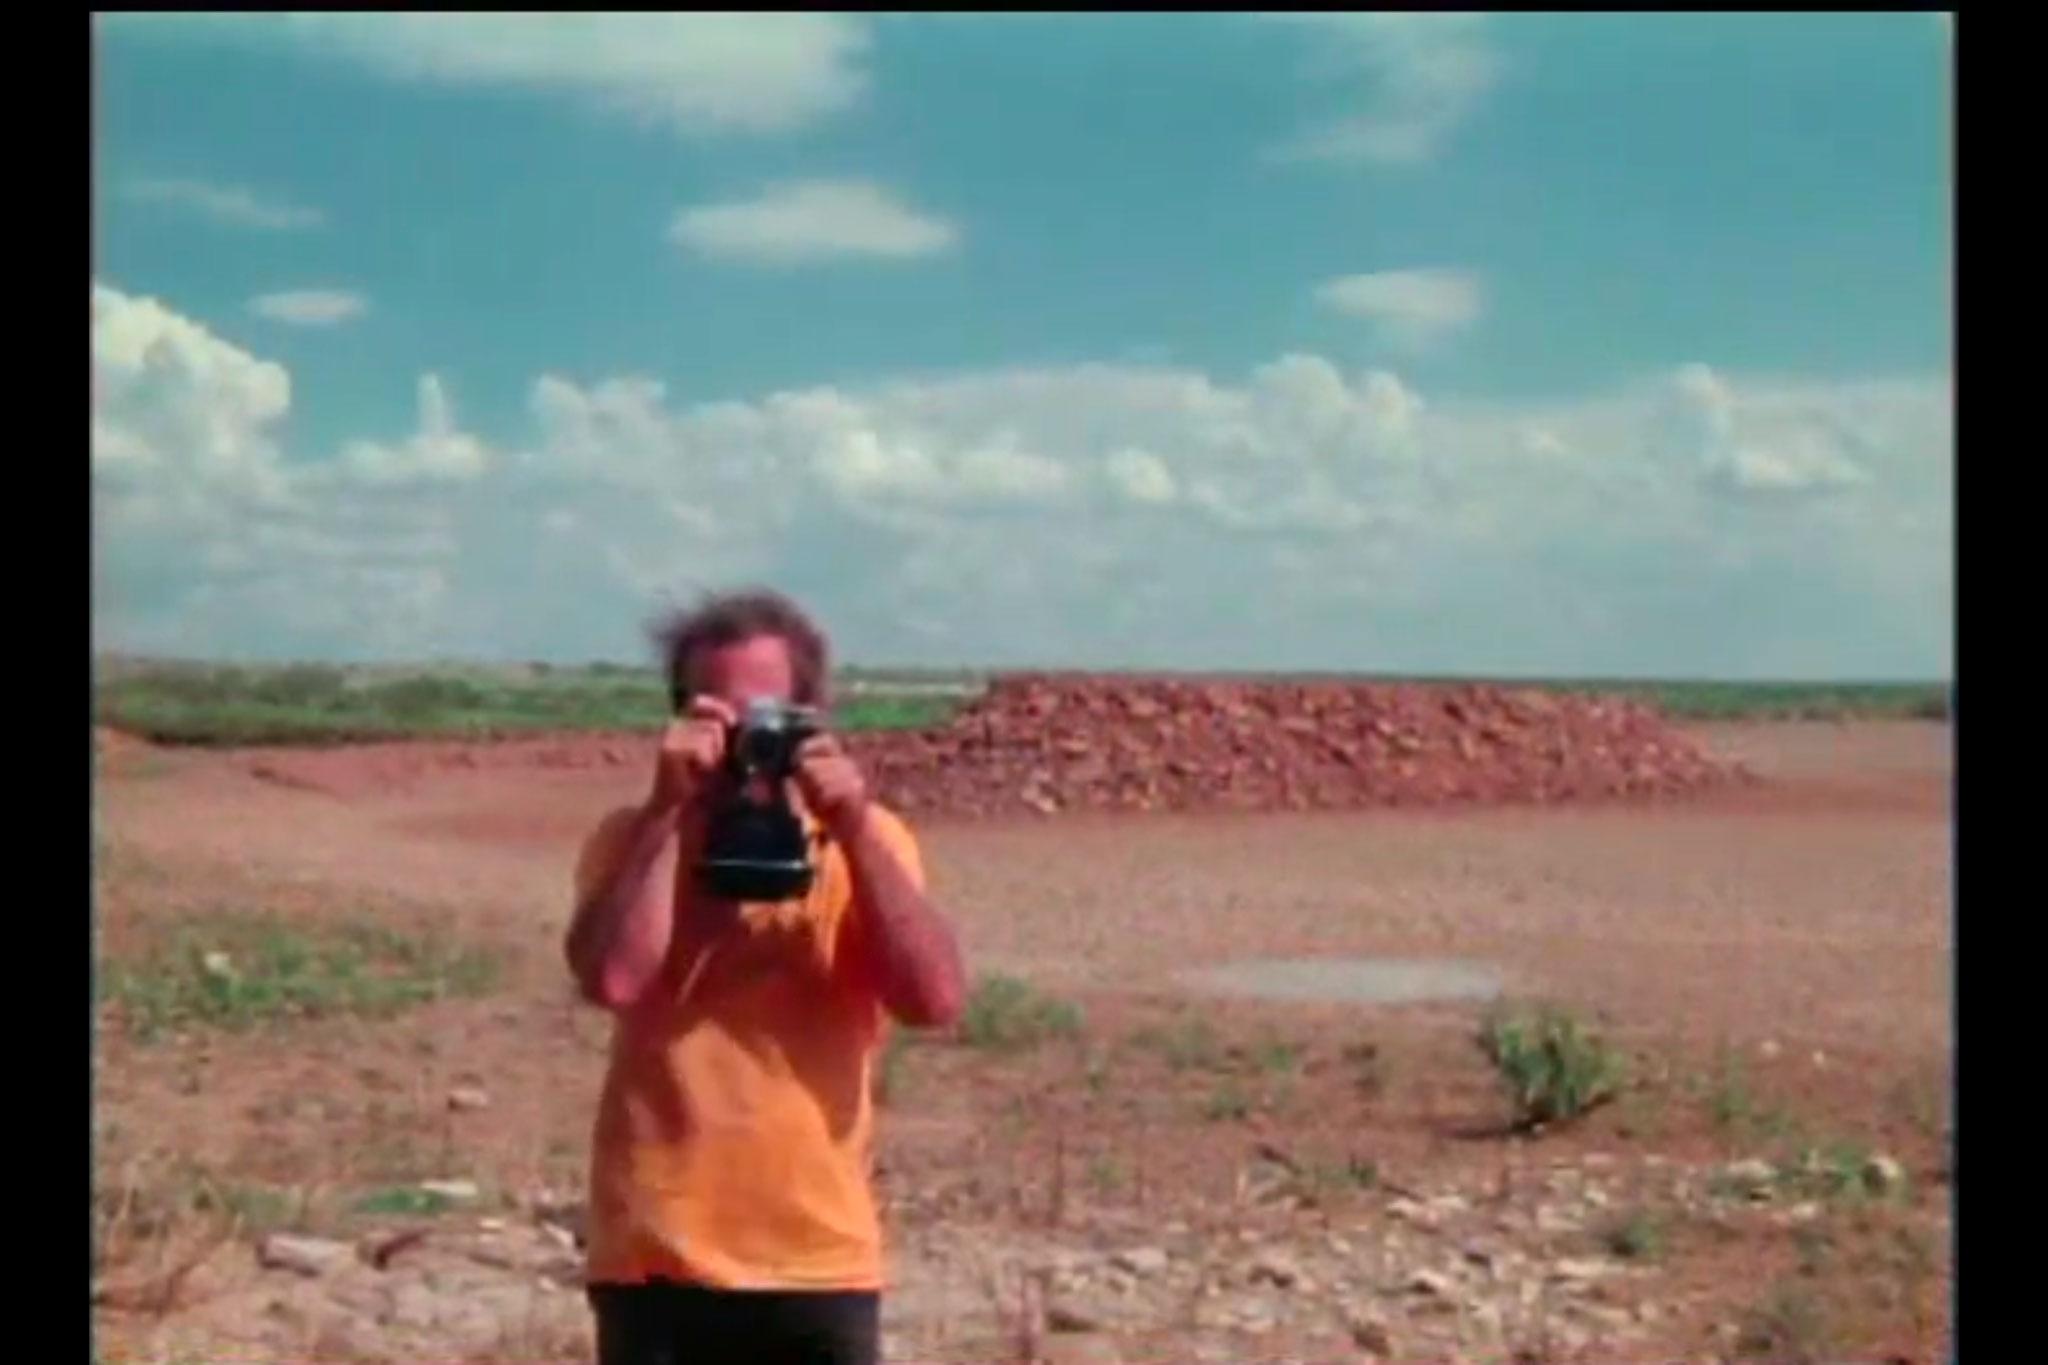 A young man taking a picture toward the camera with a dry lakebed in the background.